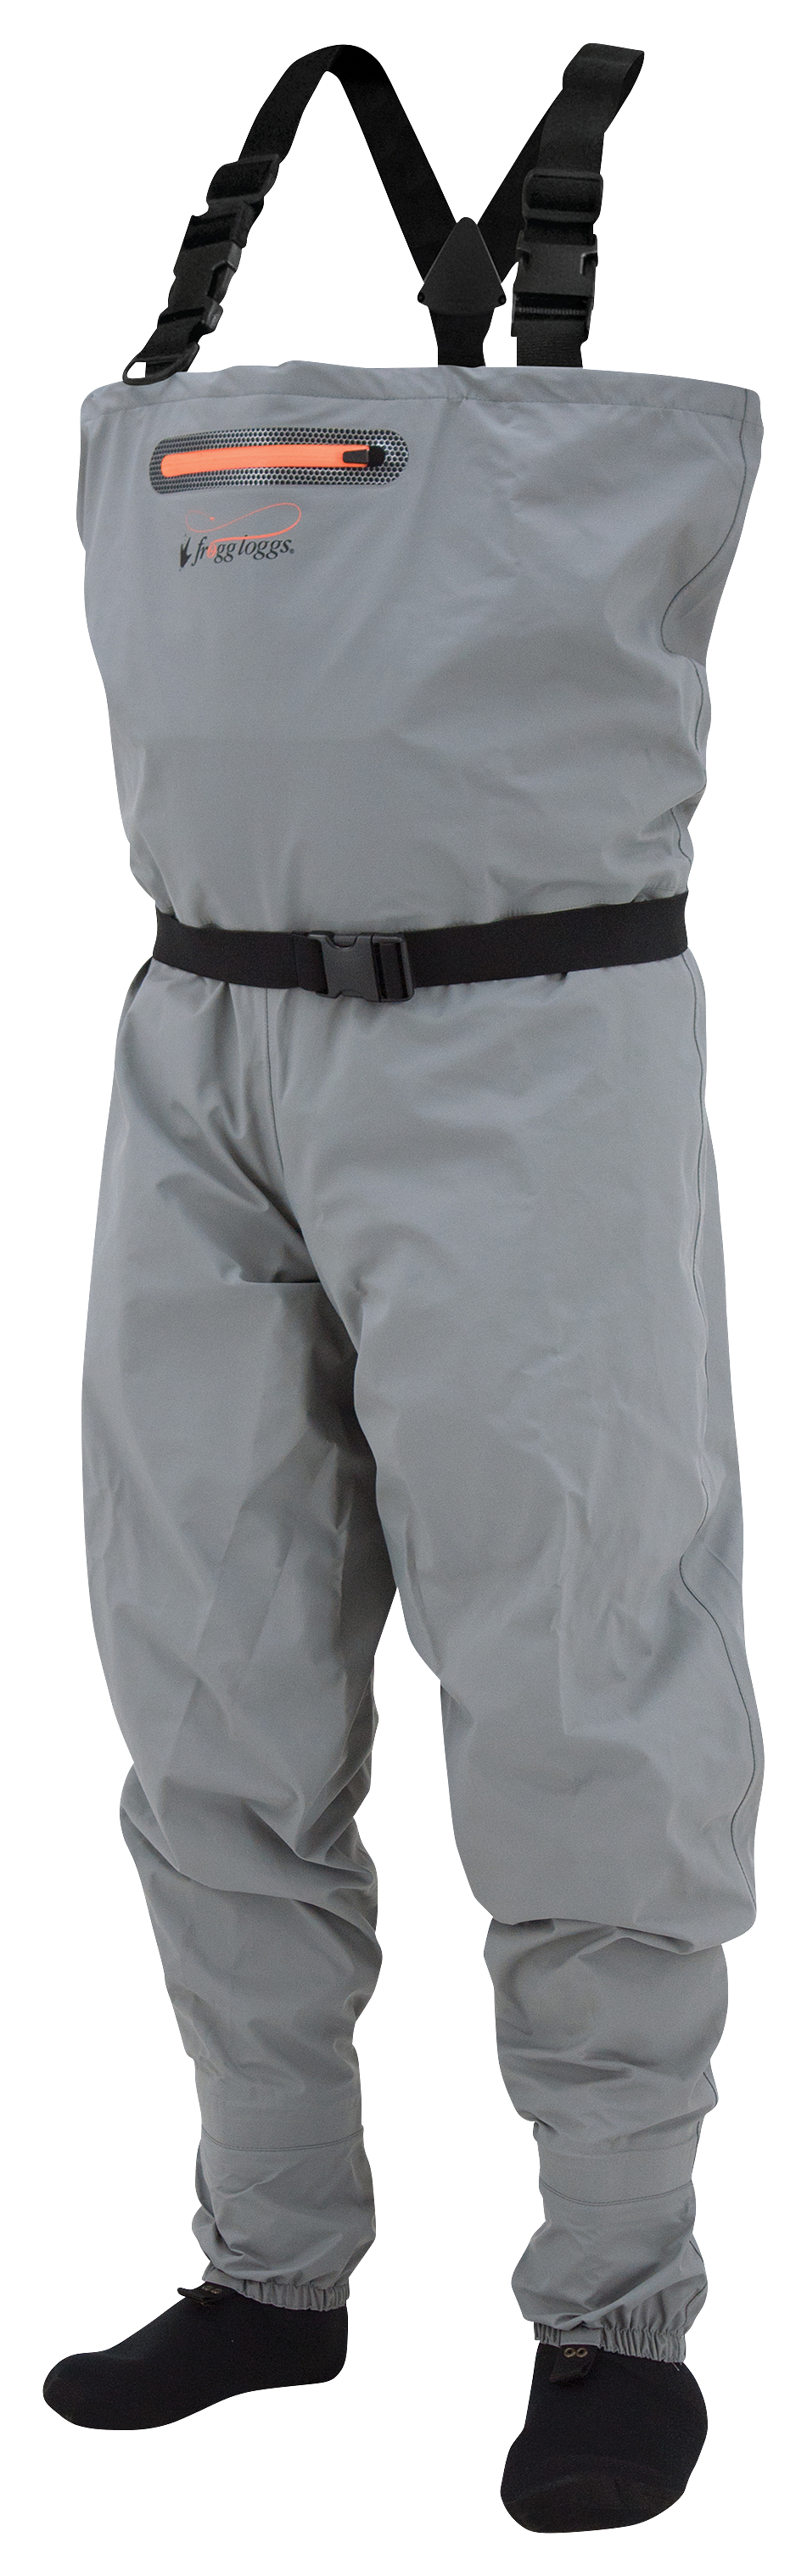 Frogg Toggs Canyon II Stockingfoot Chest Waders for Men